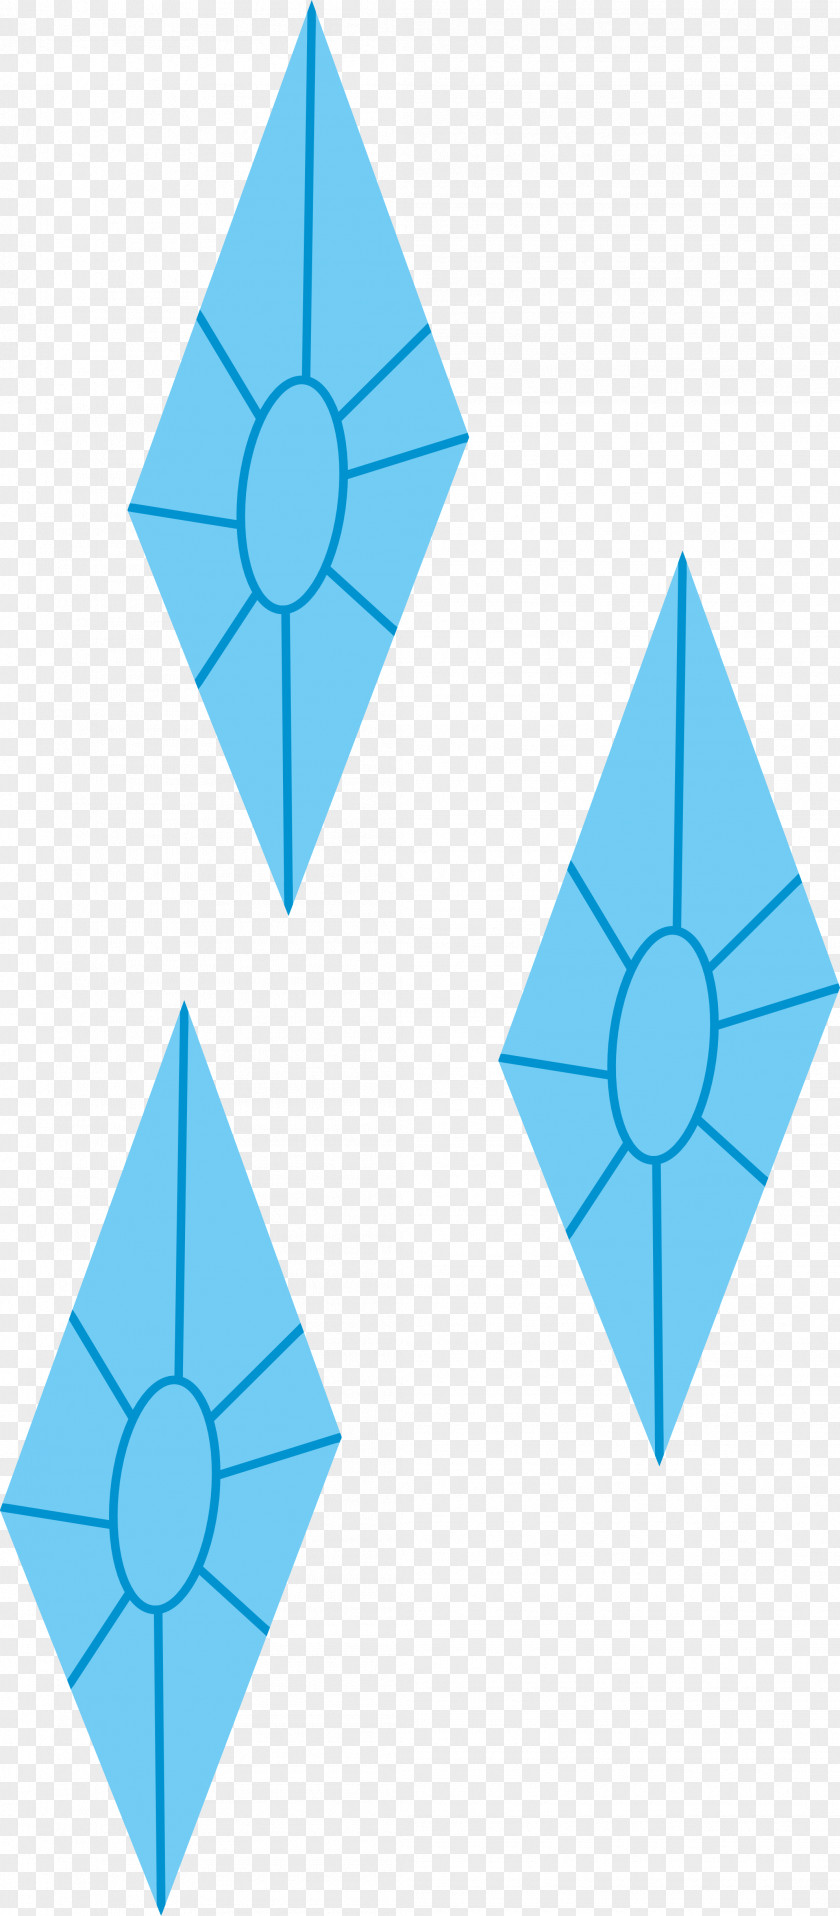 Angle Point Symmetry Pattern PNG